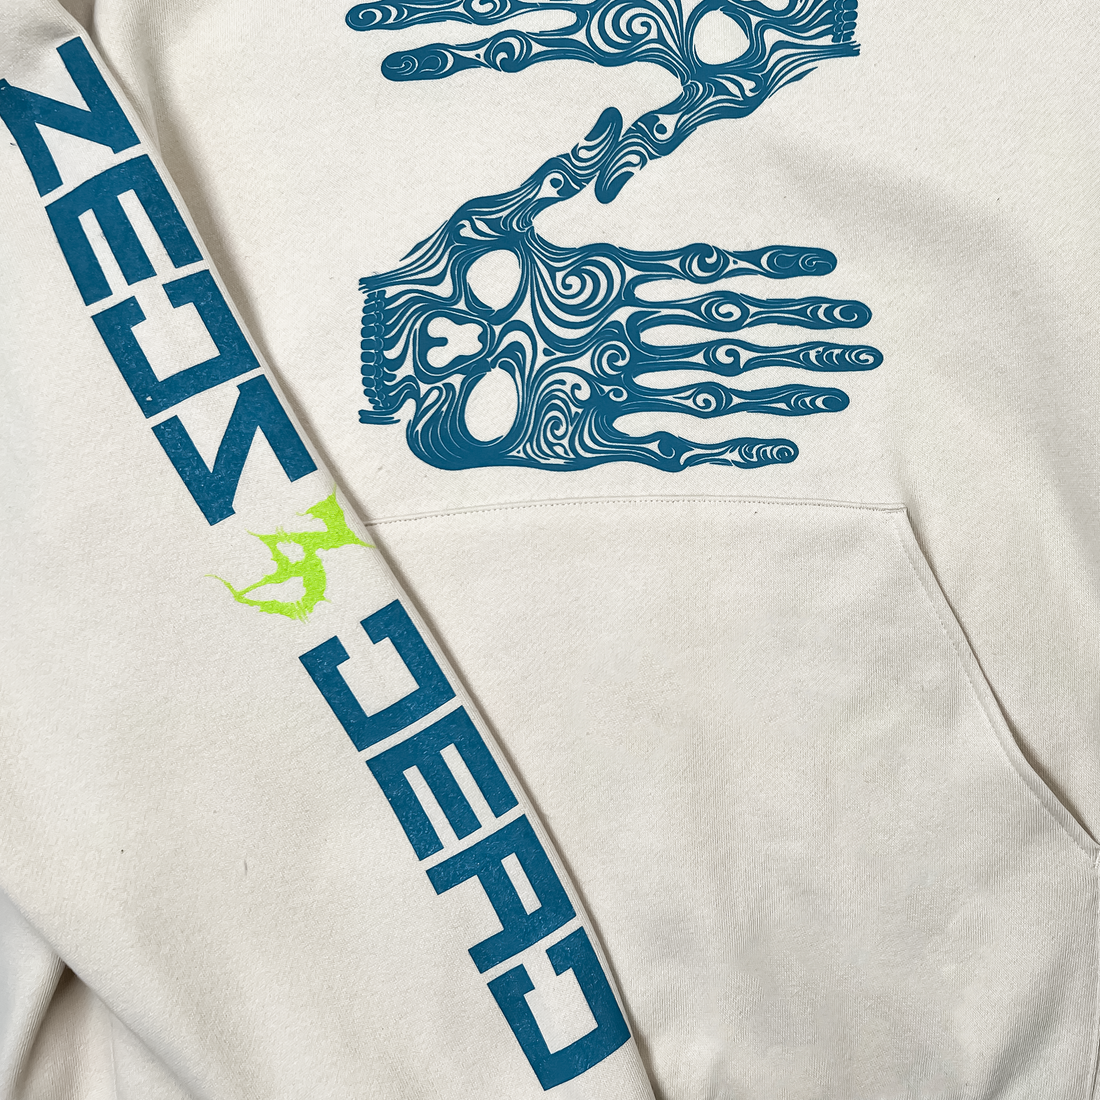 Zeds Dead - Obey - Relaxed Hoodie - Natural